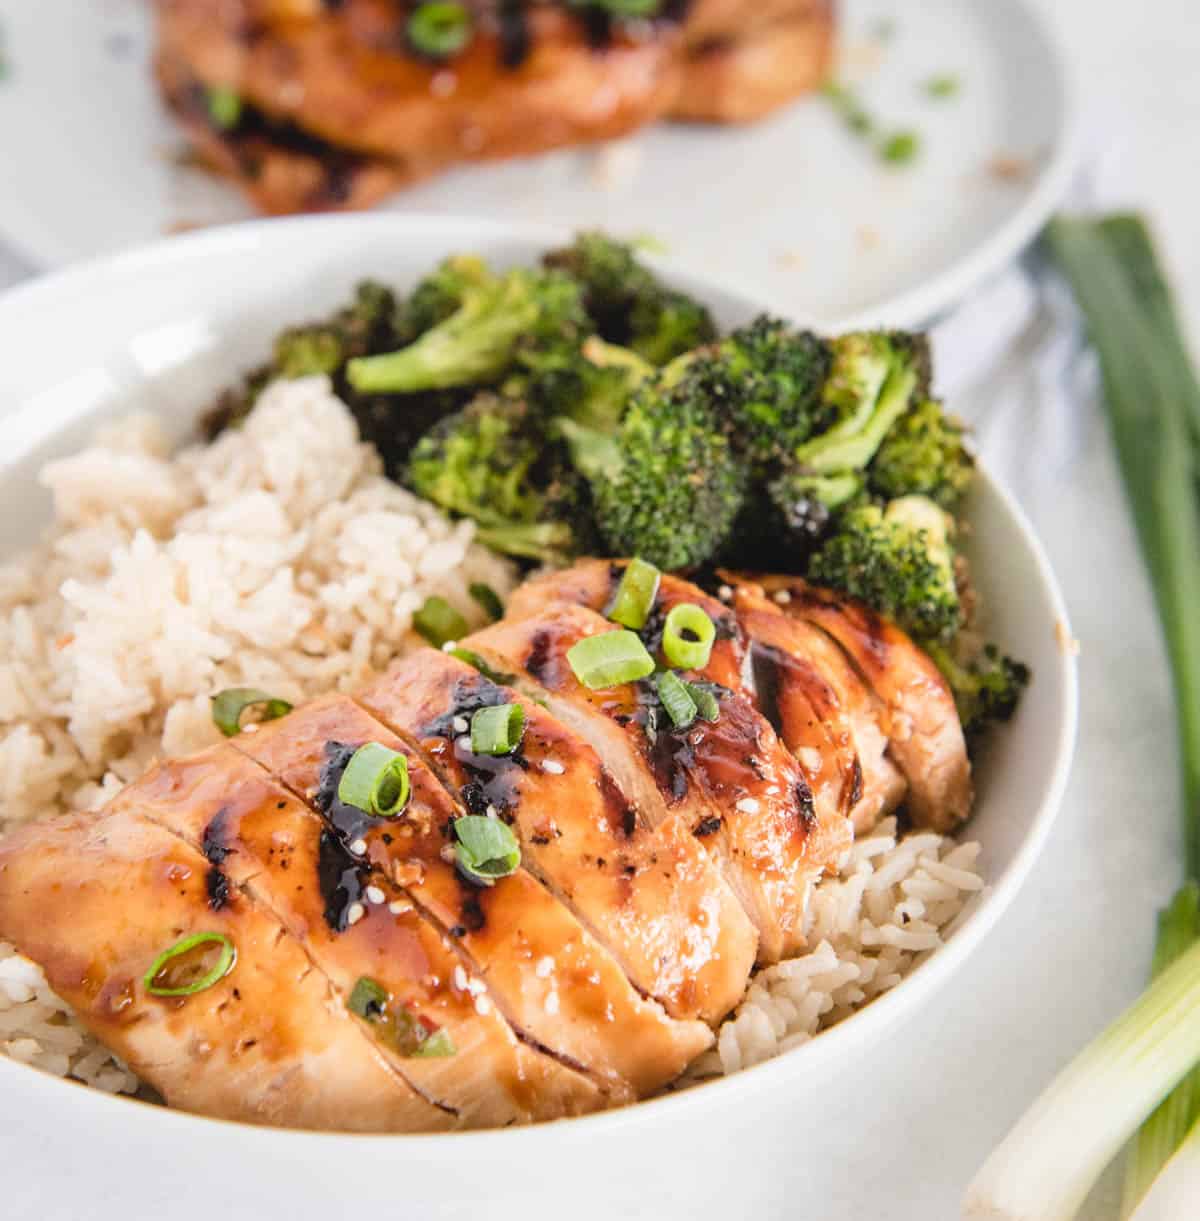 teriyaki chicken in a bowl with rice and broccoli from side view